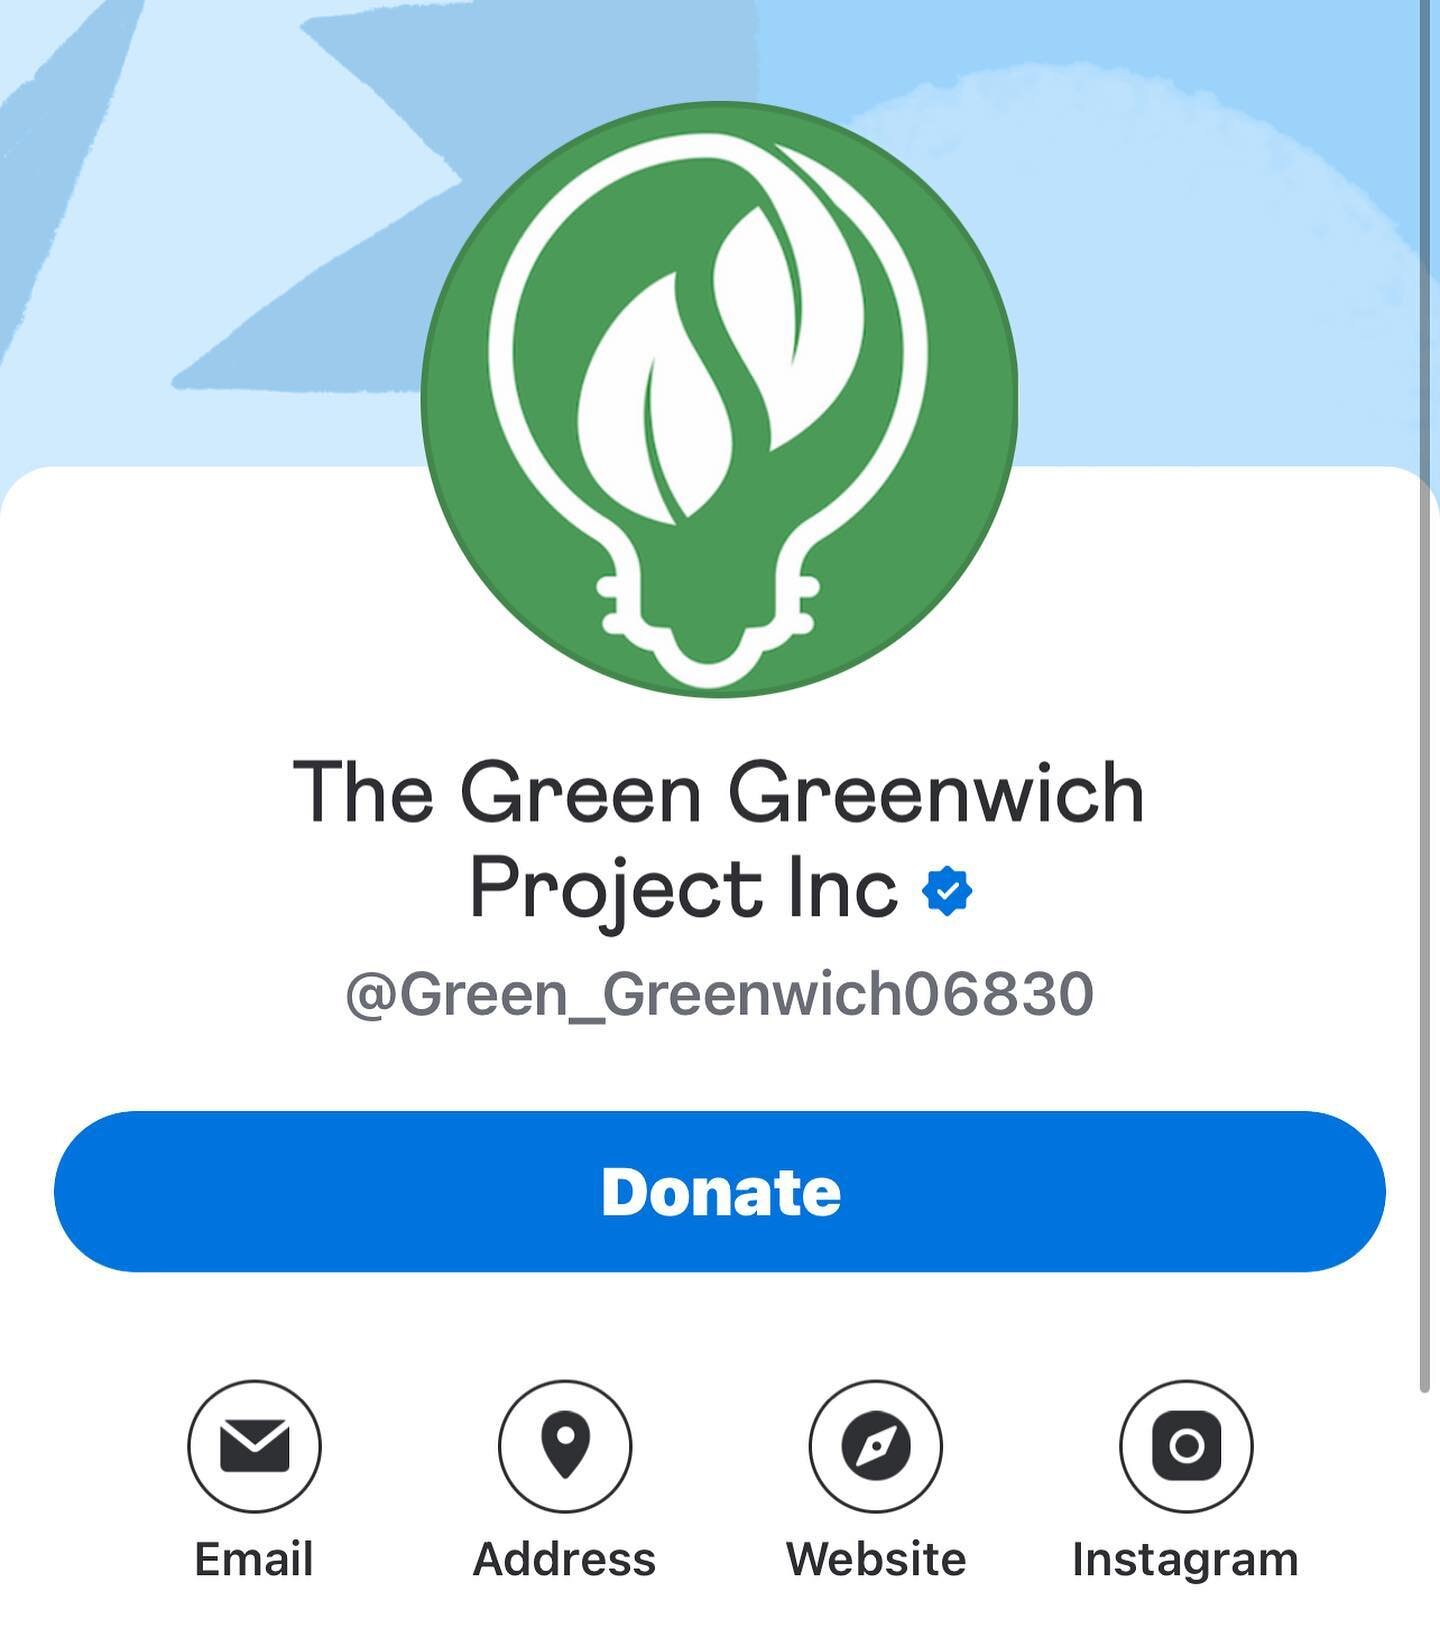 Our Venmo is officially up and running! Recently we have been looking into starting a development passive solar farm in Greenwich as well as an educational kids camp for local middle schoolers. We continue to update on our newest initiatives and don&